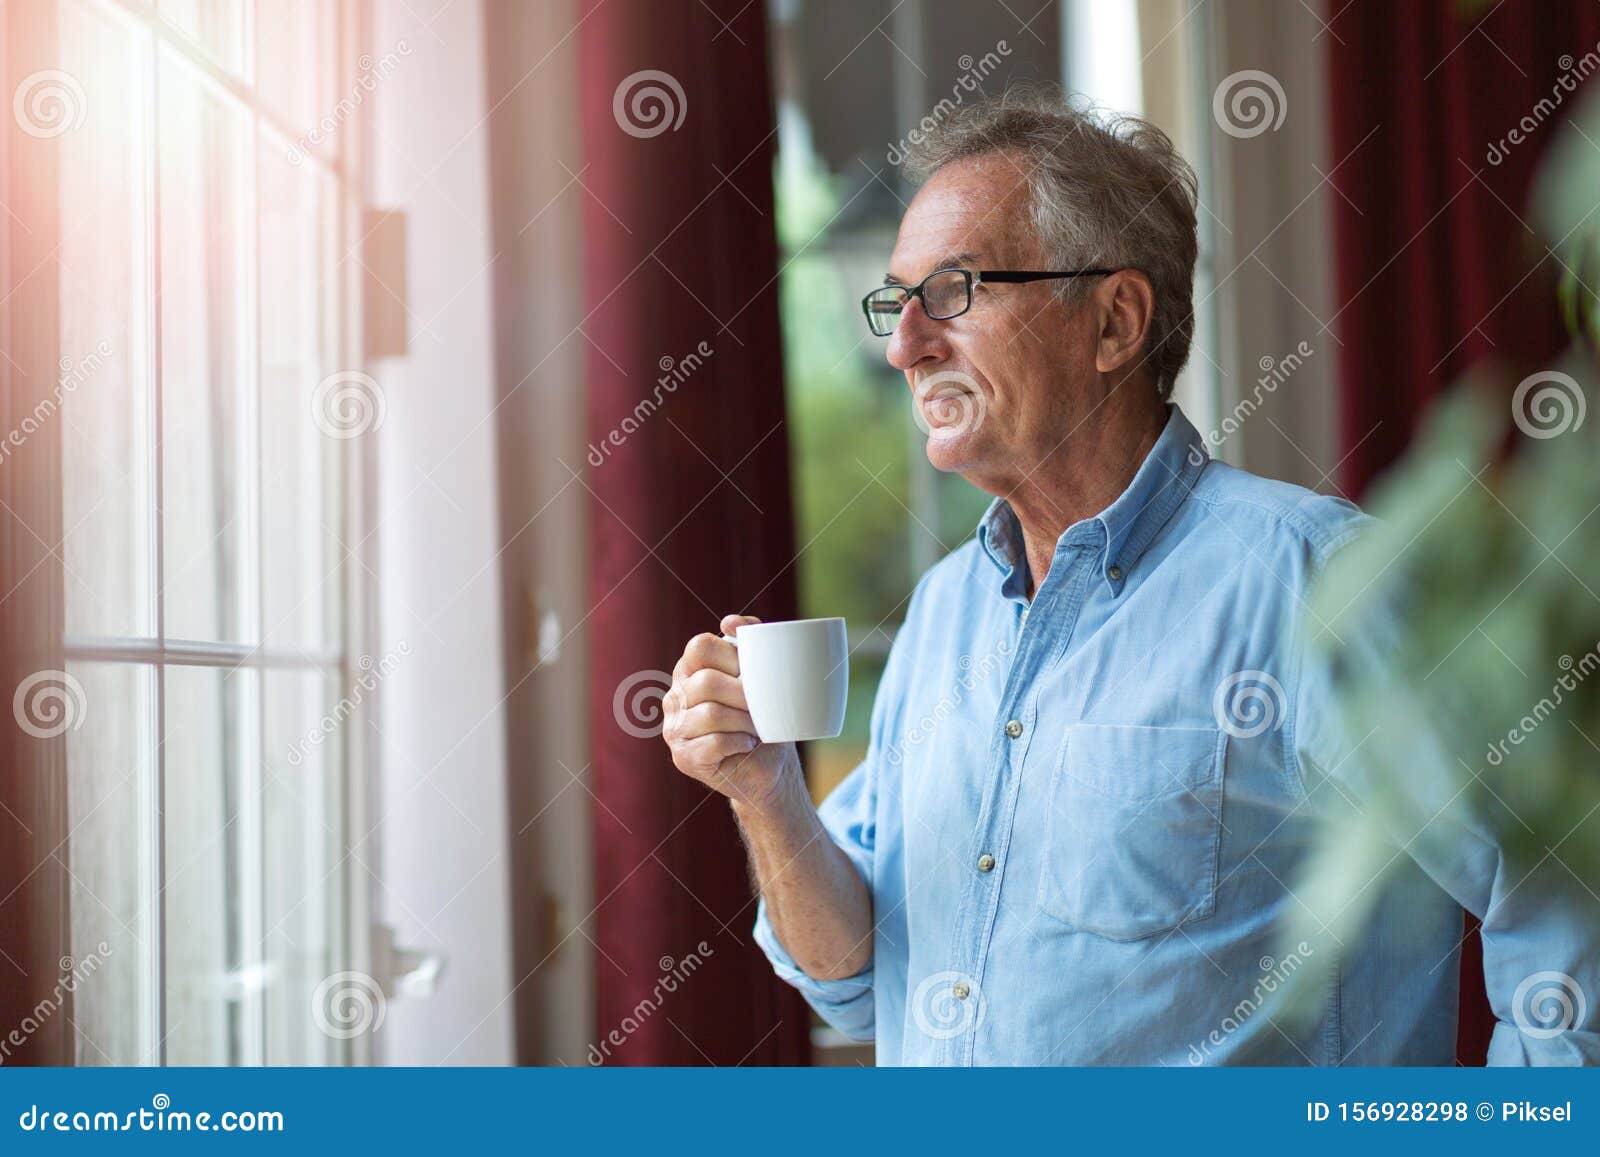 relaxed mature man at home standing by the window